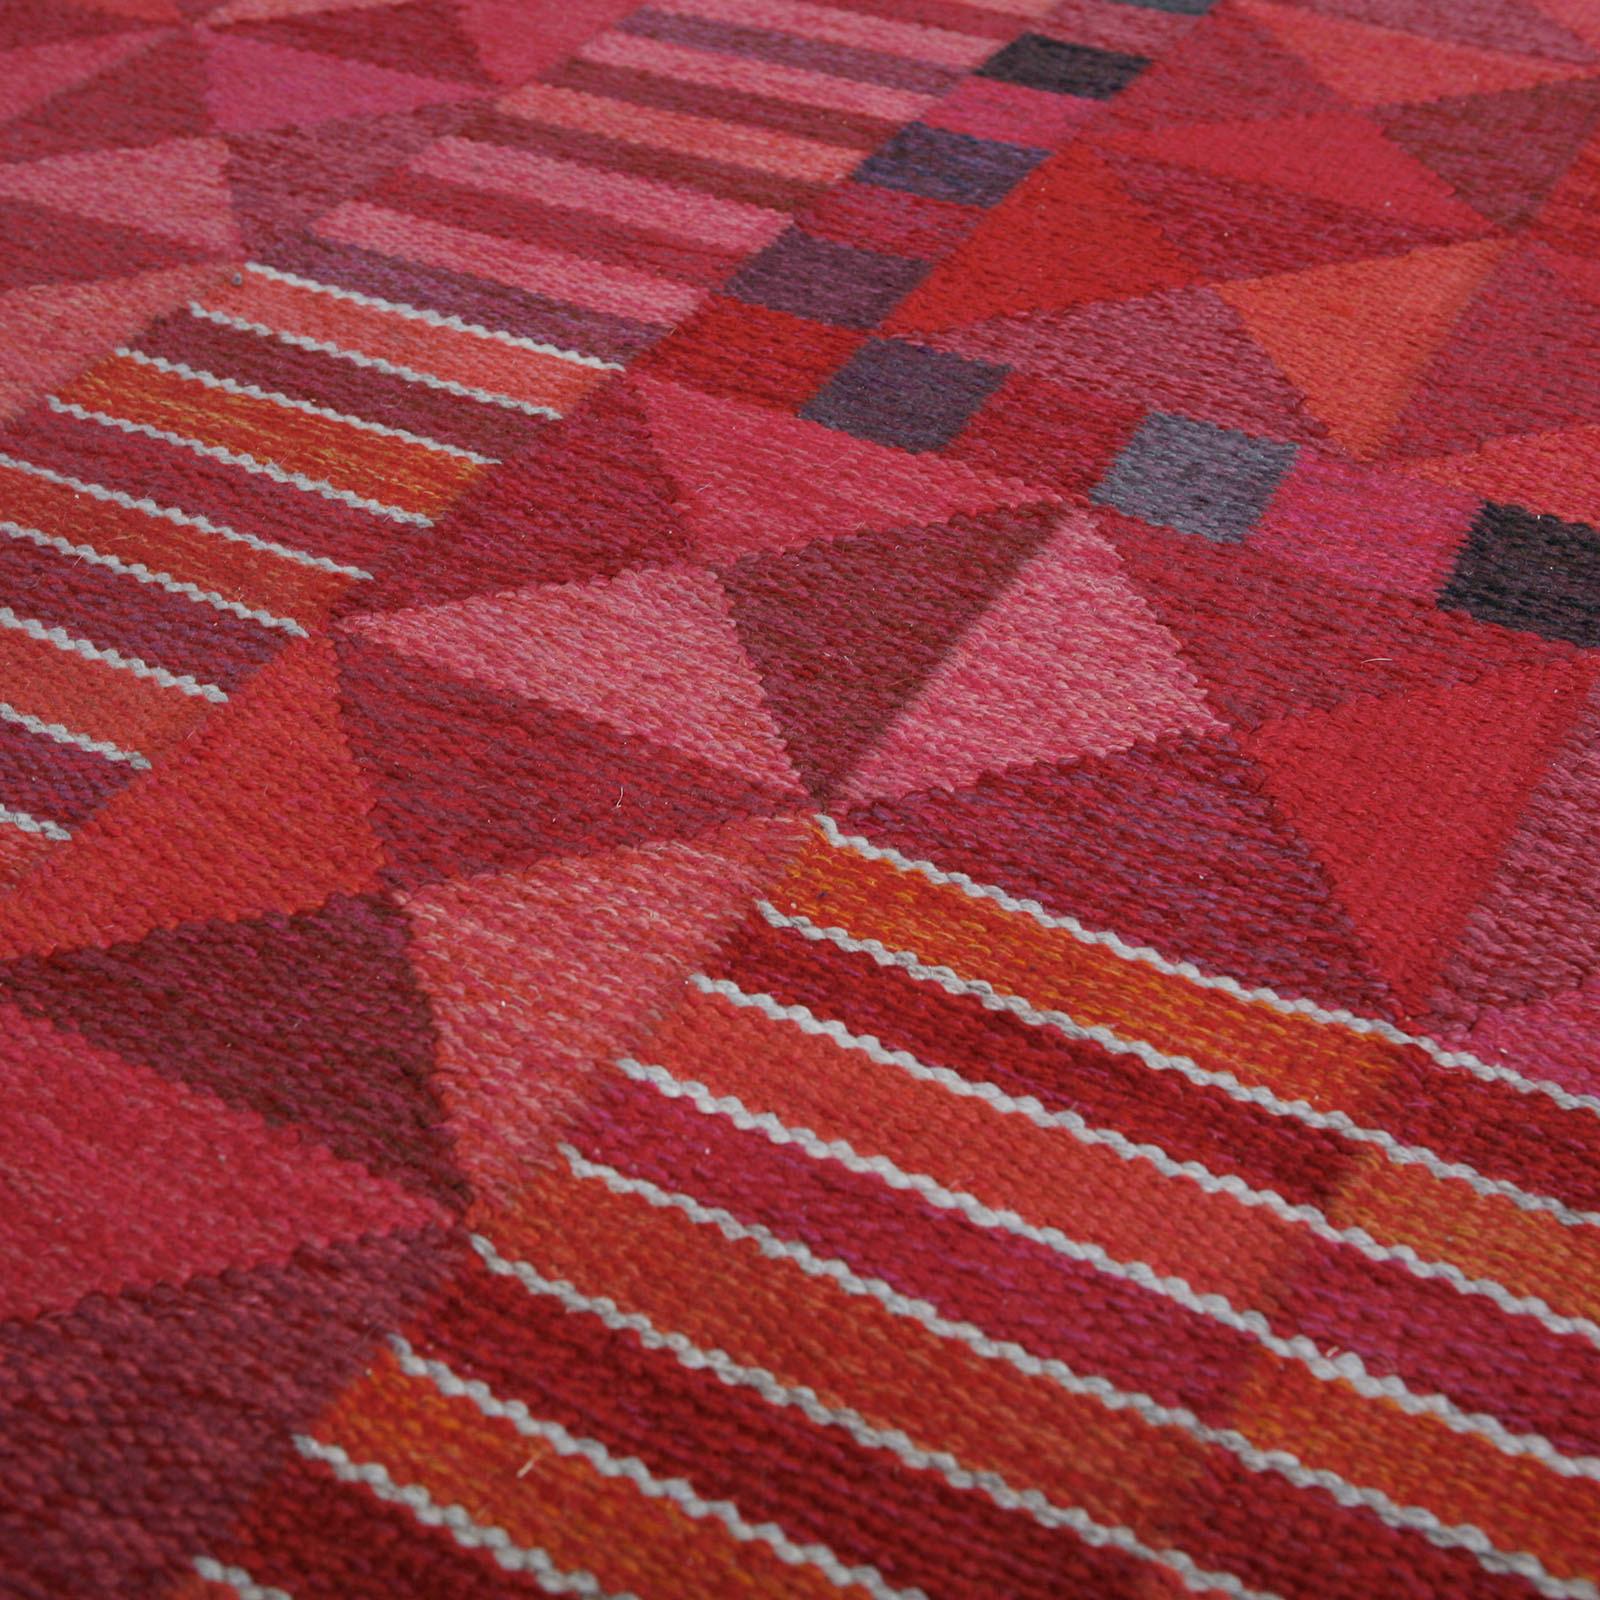 A large rug in vibrant red and orange hues in a geometric pattern. Pure wool in rölakan flat-weave technique.
Designed in 1958 by Swedish textile artist Marianne Richter, produced by Märta Måås-Fjetterström Studio in Sweden.
Measures: Length